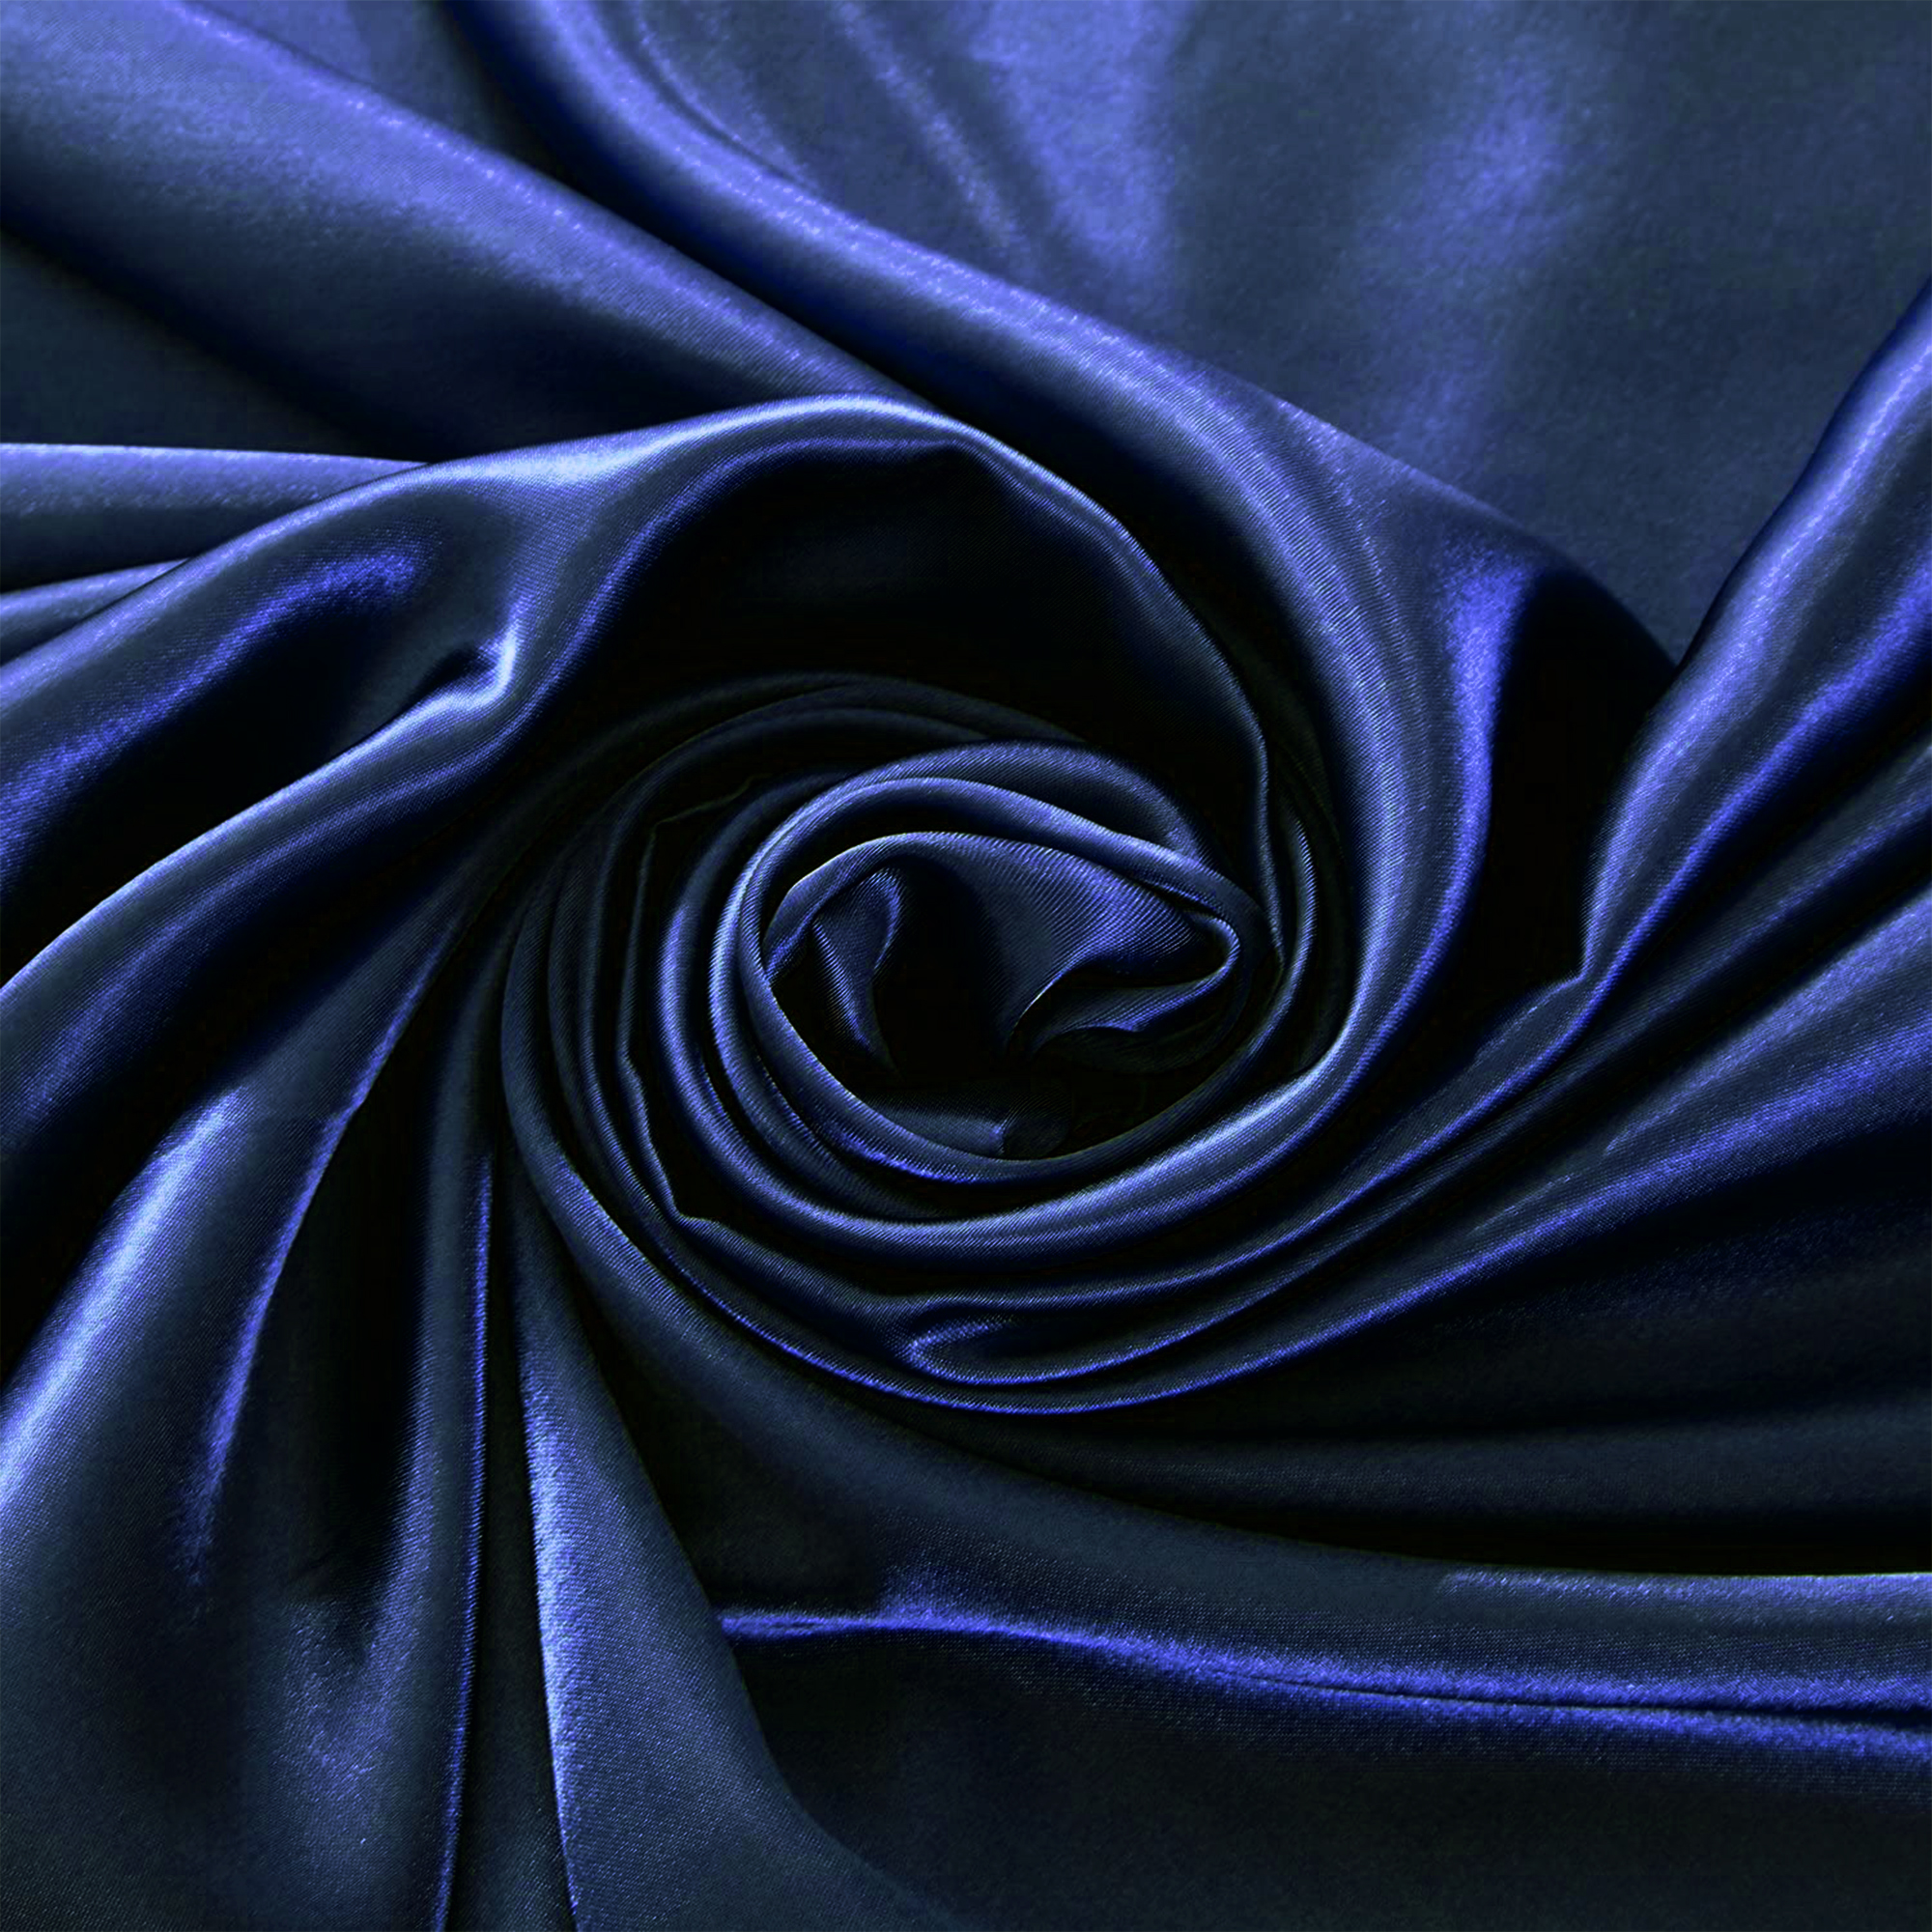 Navy Blue Satin Fitted Sheet Single Bed